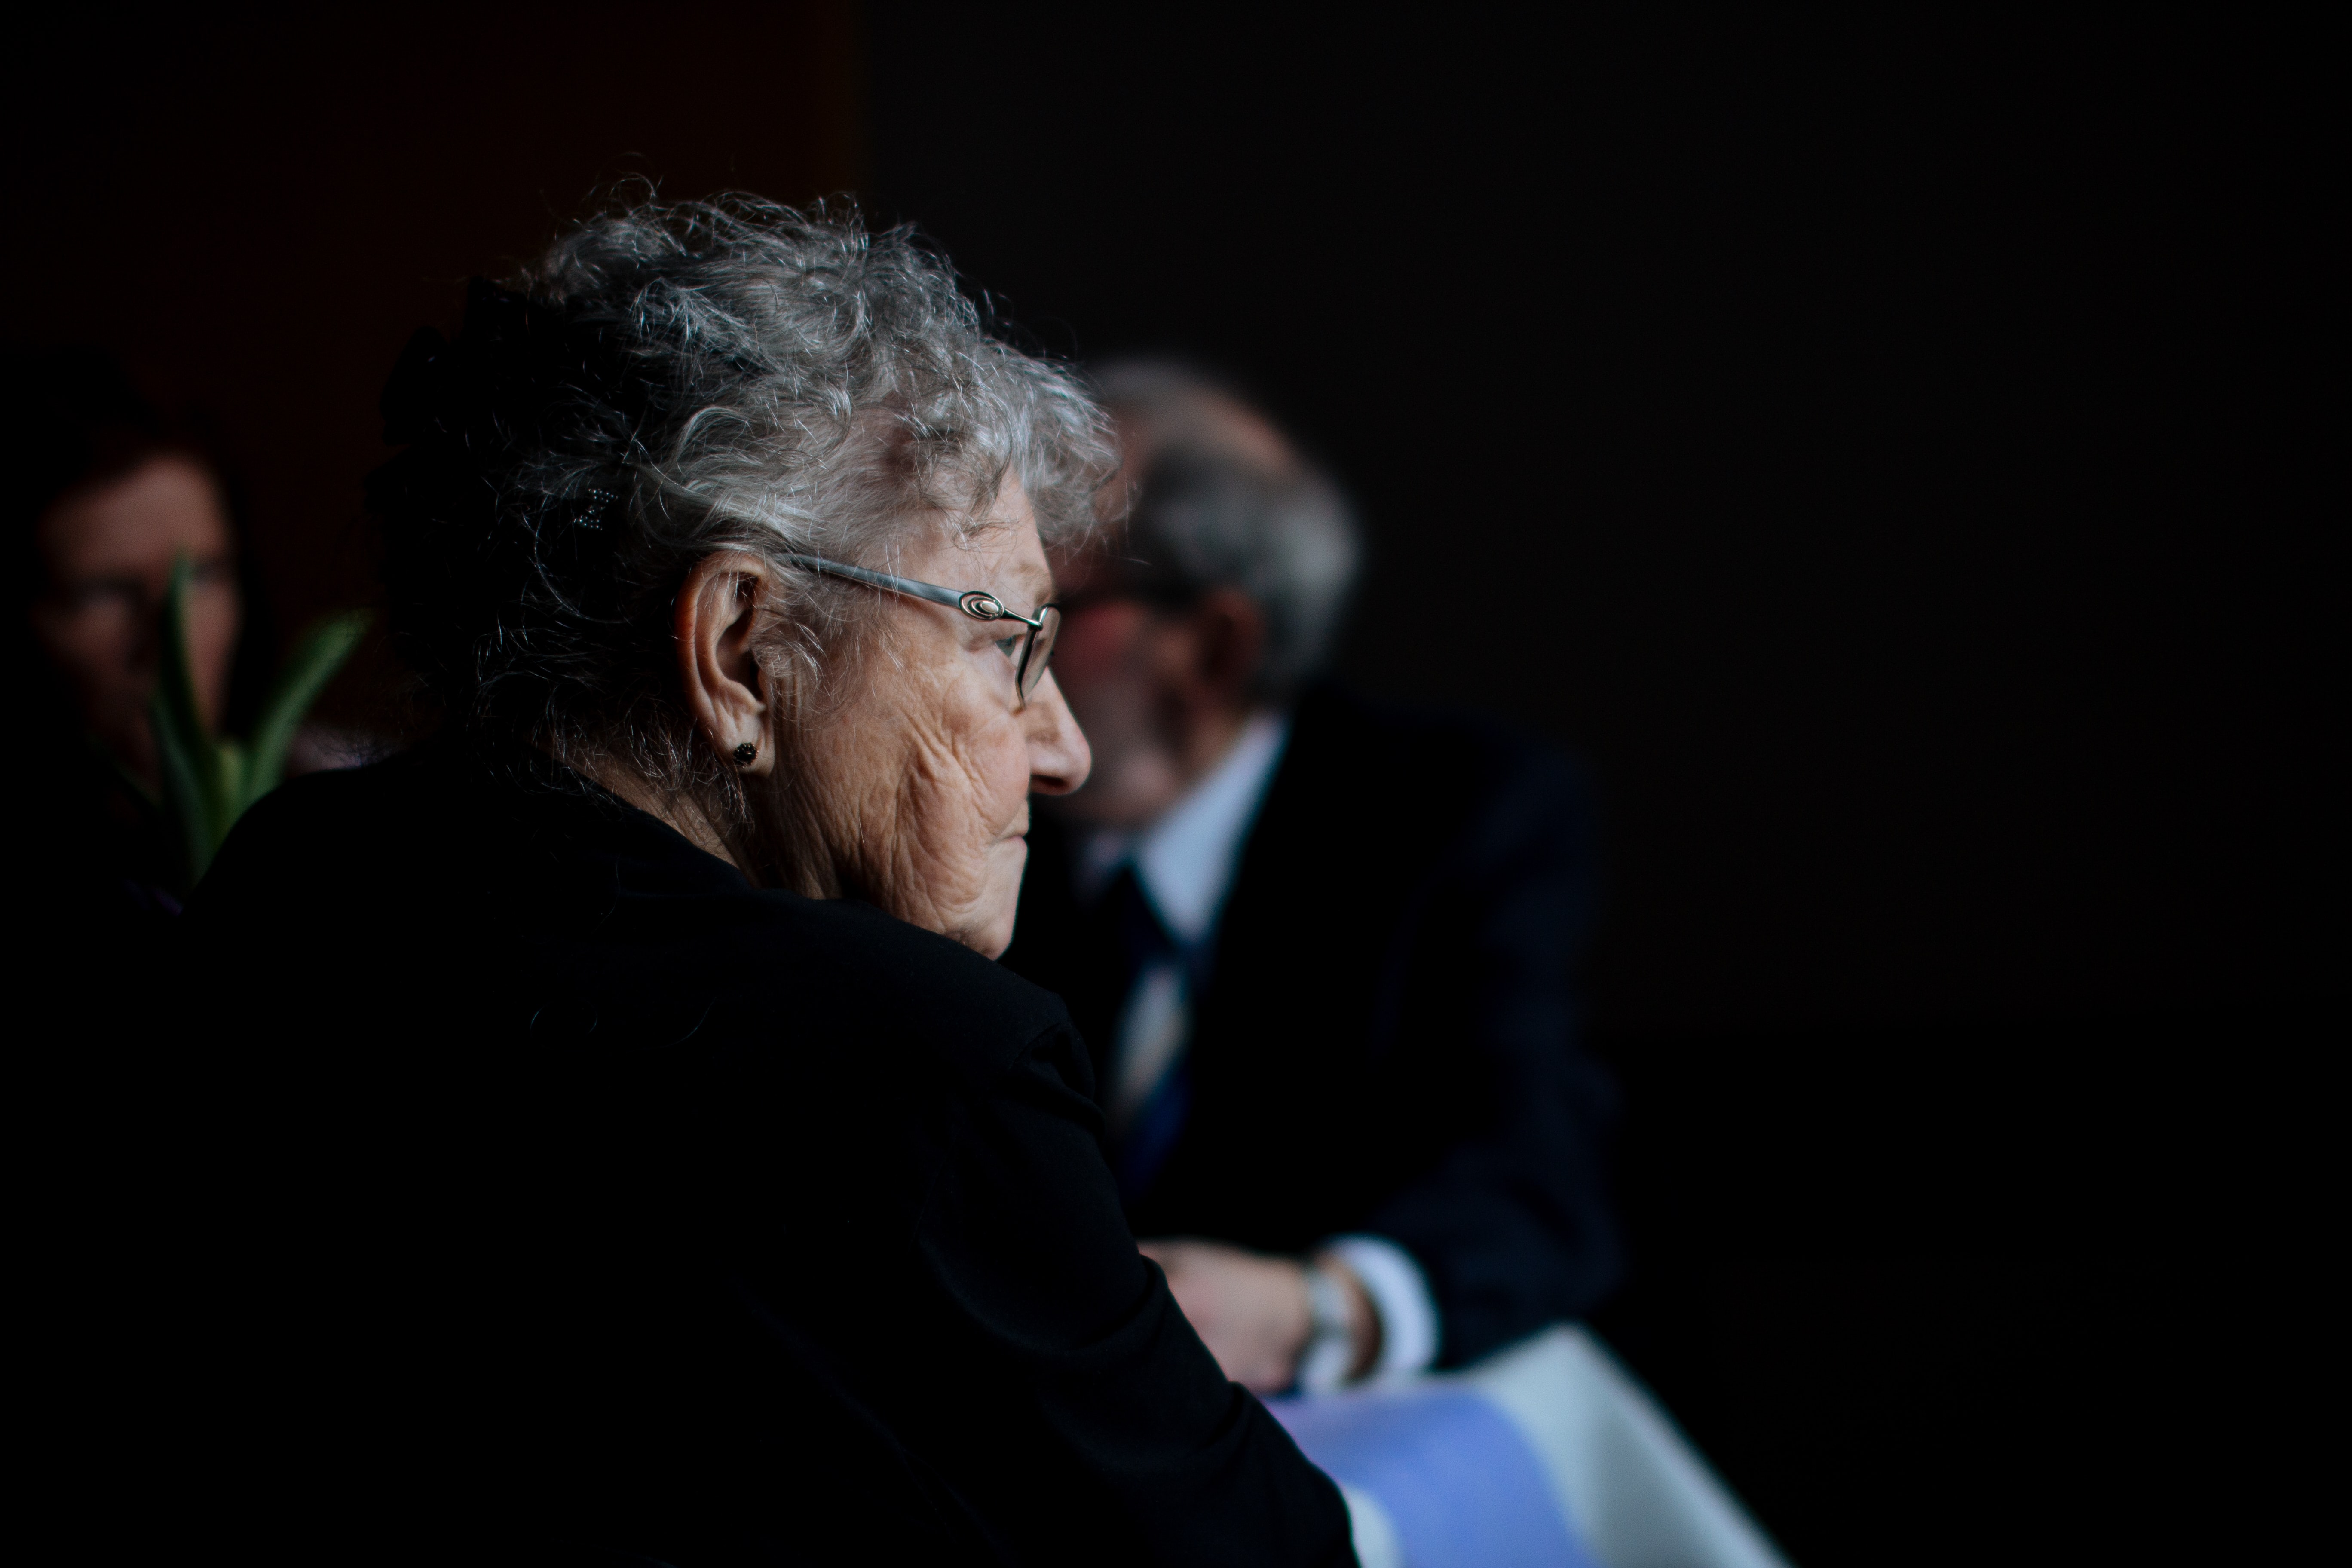 an older woman against a dark background illustrating aging loneliness and regret